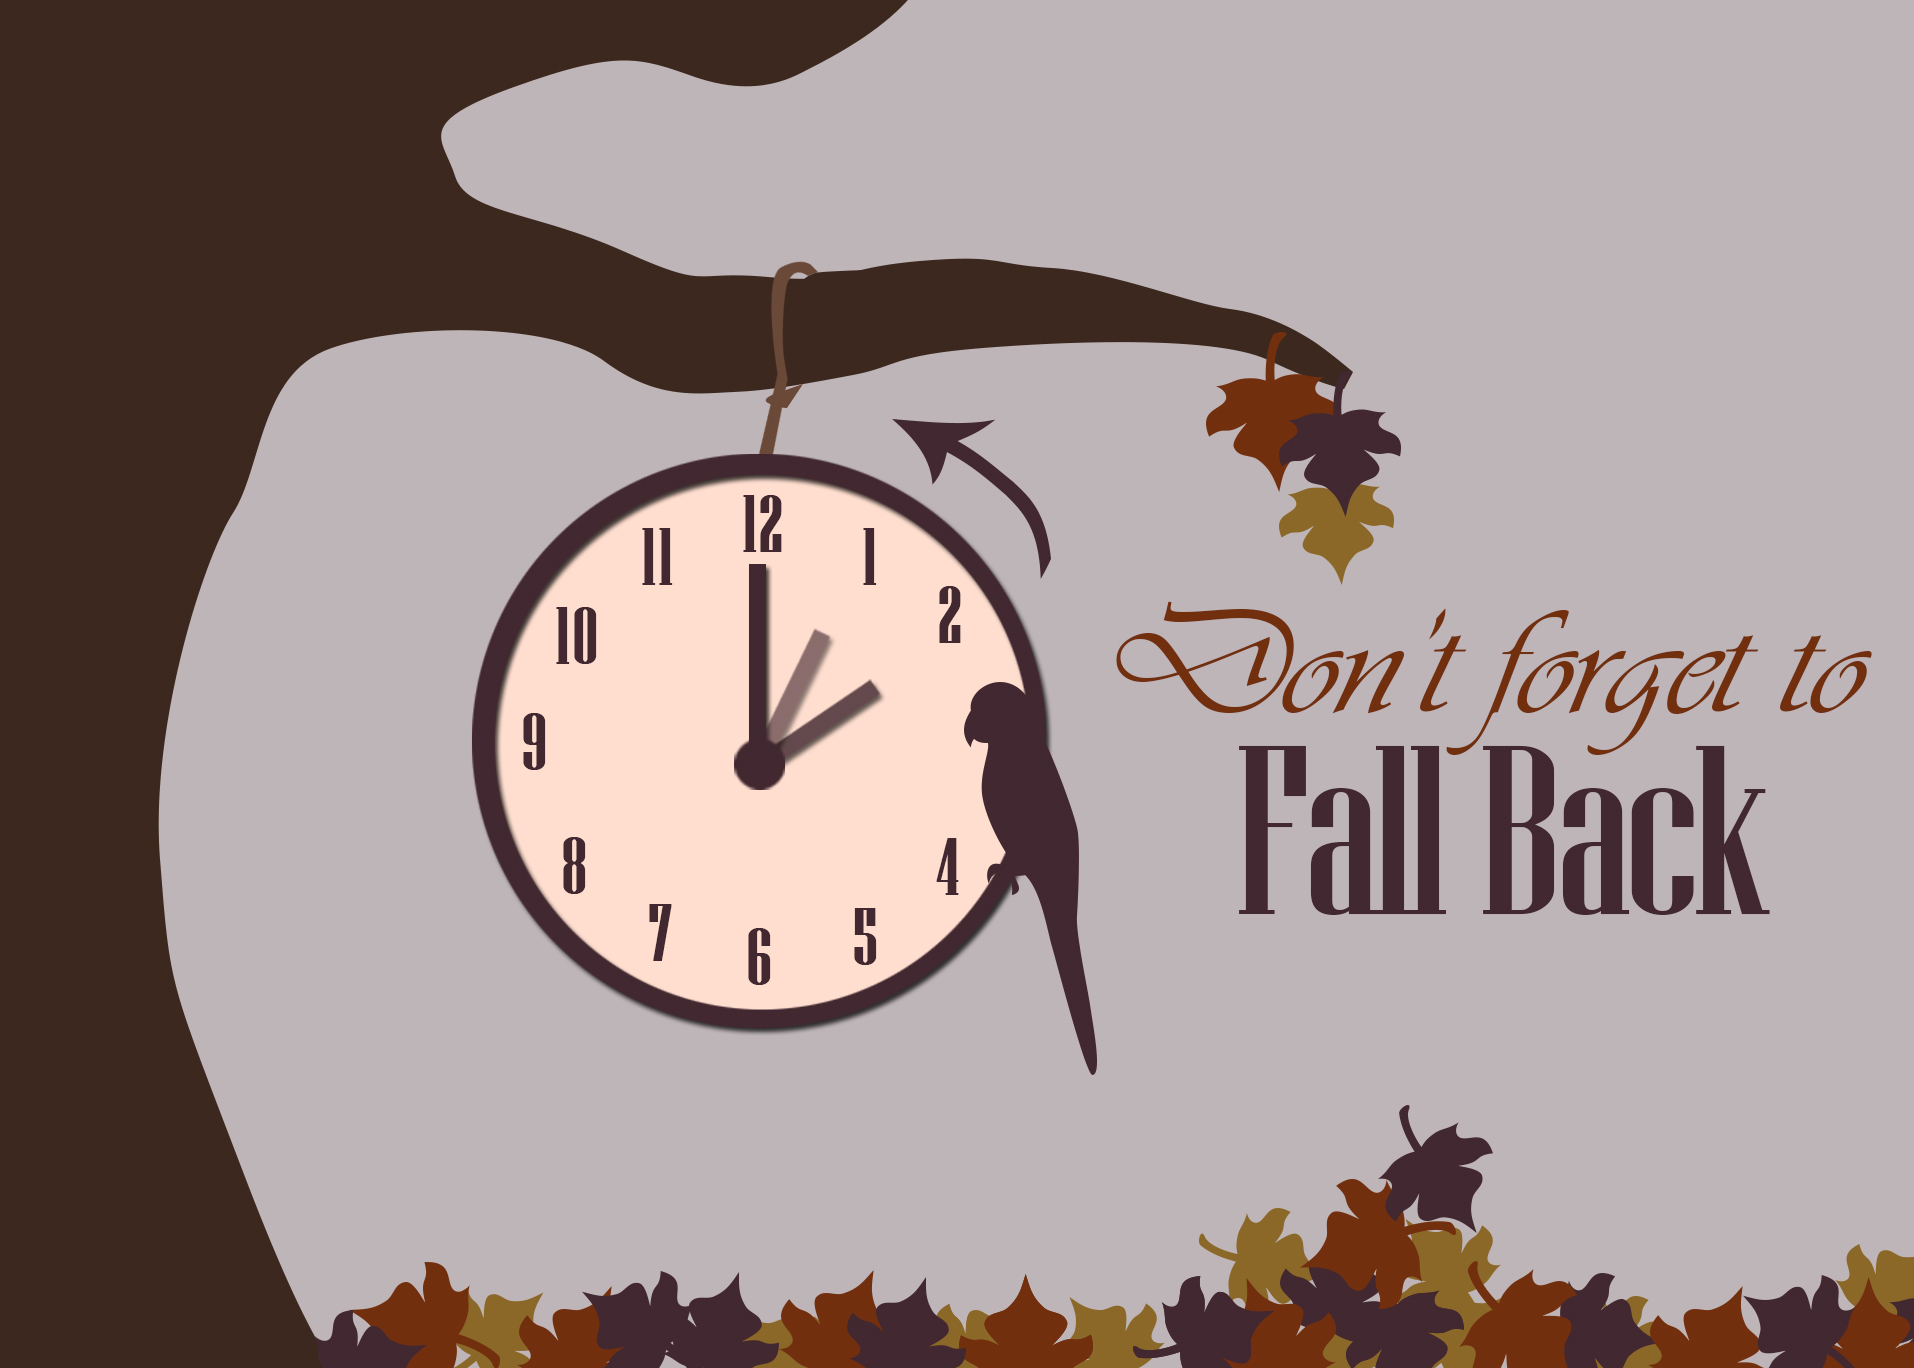 2016 clipart fall back, 2016 fall back Transparent FREE for.